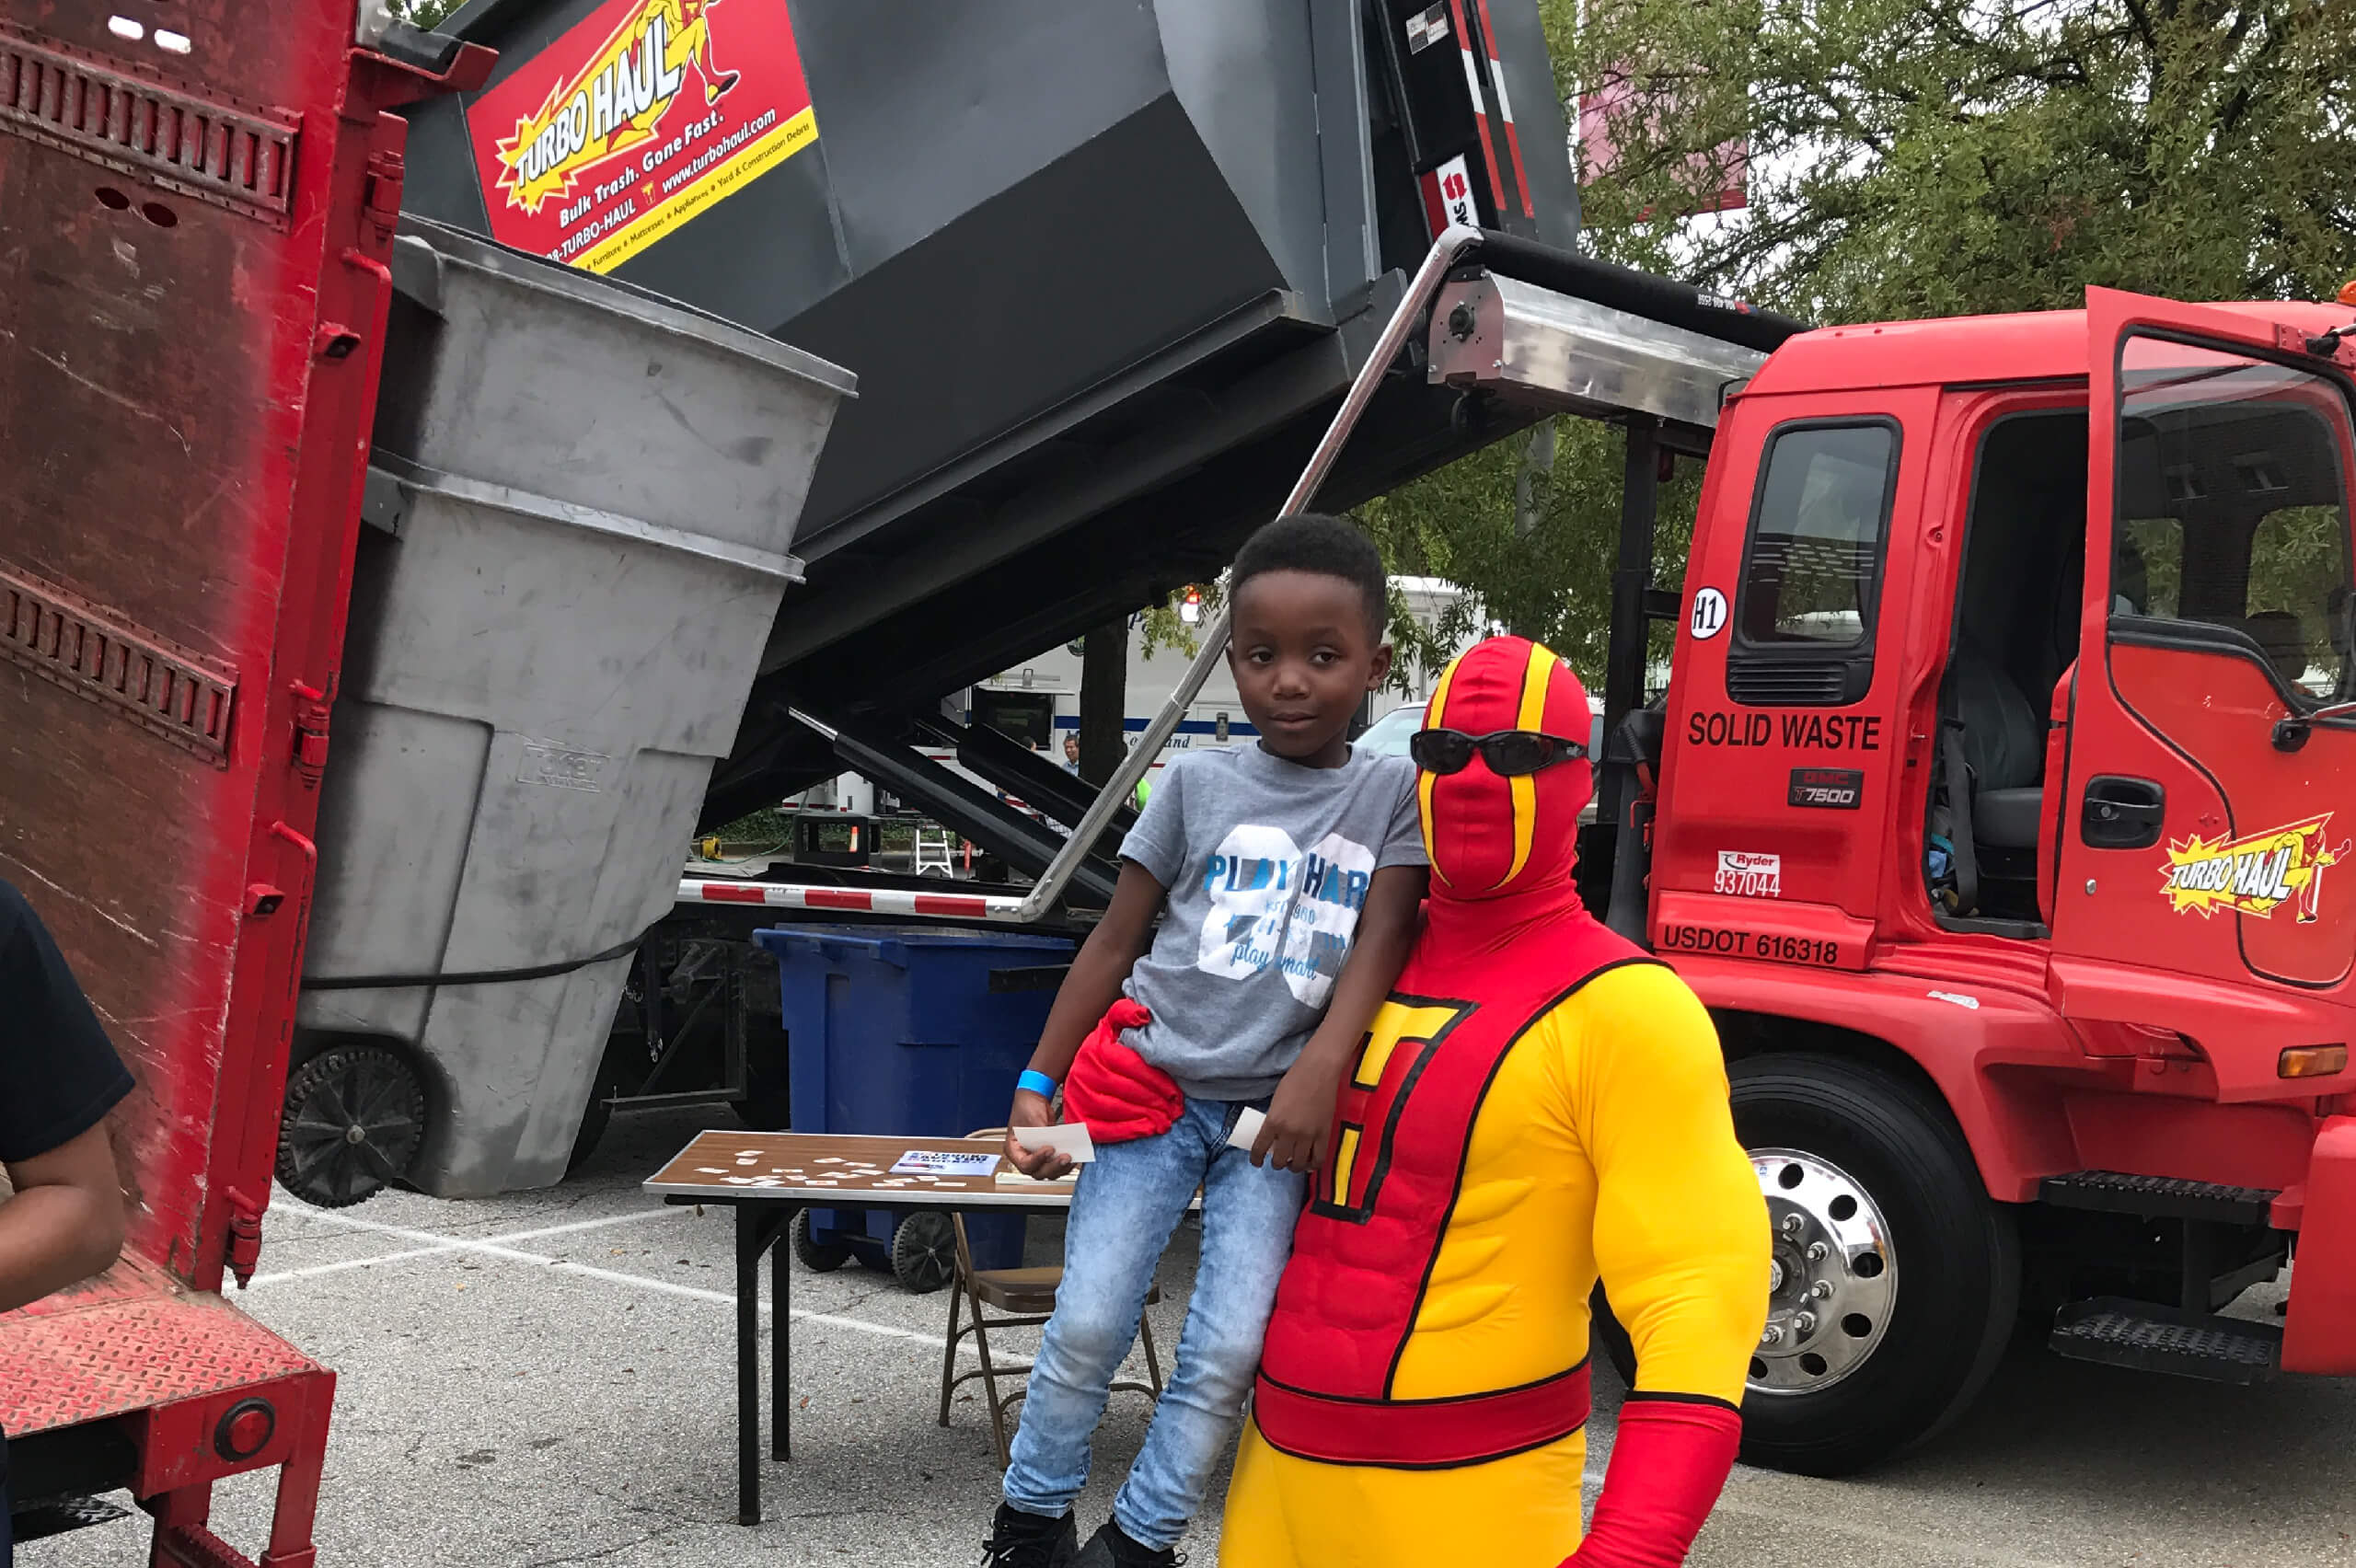 TurboMan poses with young Rosslyn, VA residents during a bulk trash hauling and junk removal event.